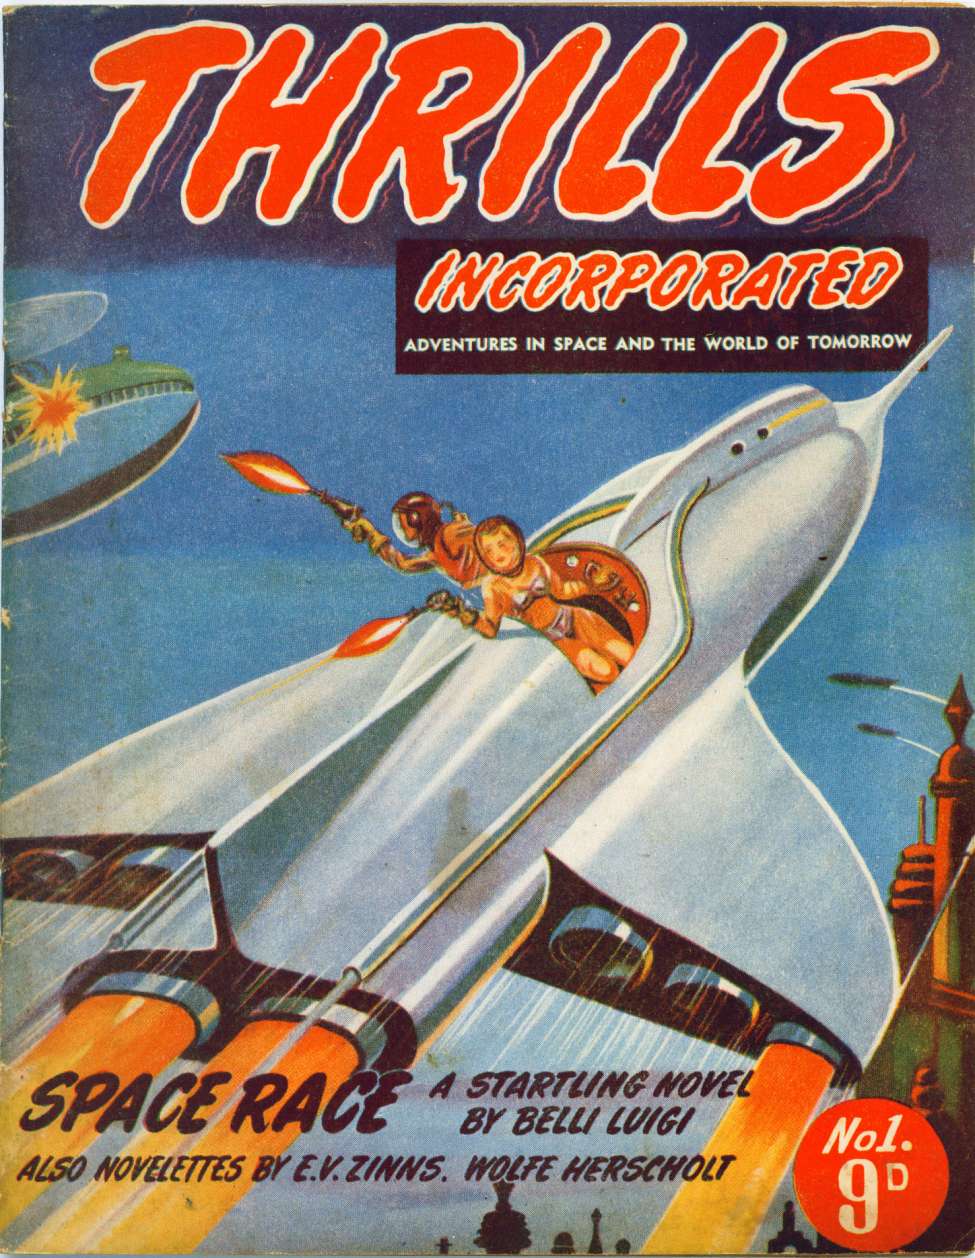 Comic Book Cover For Thrills Incorporated 1 - Space Race - Belli Luigi